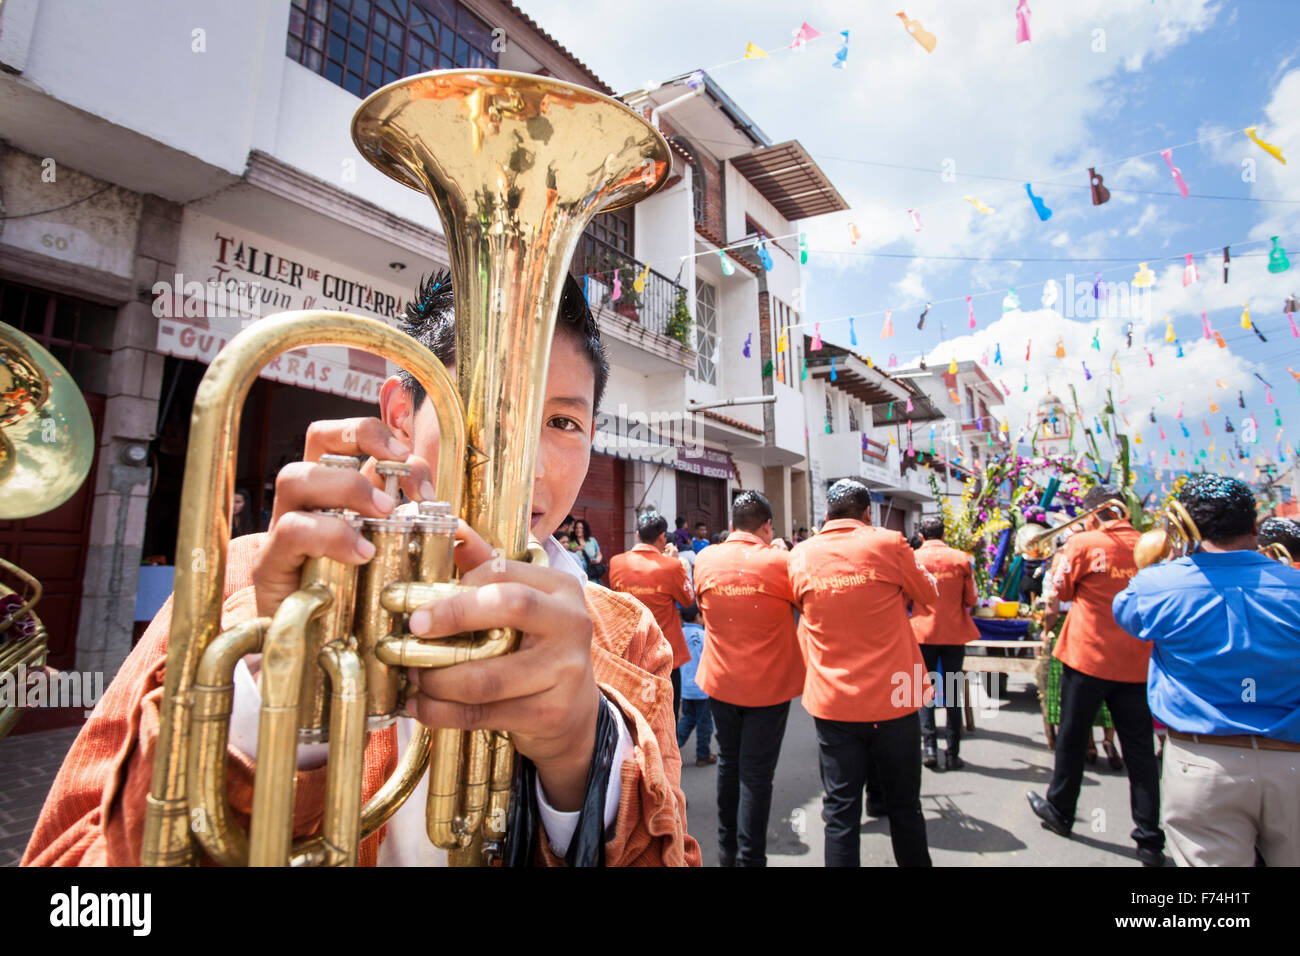 A young baritone player turns around during the Guitar Festival parade in Paracho, Michoacan, Mexico. Stock Photo